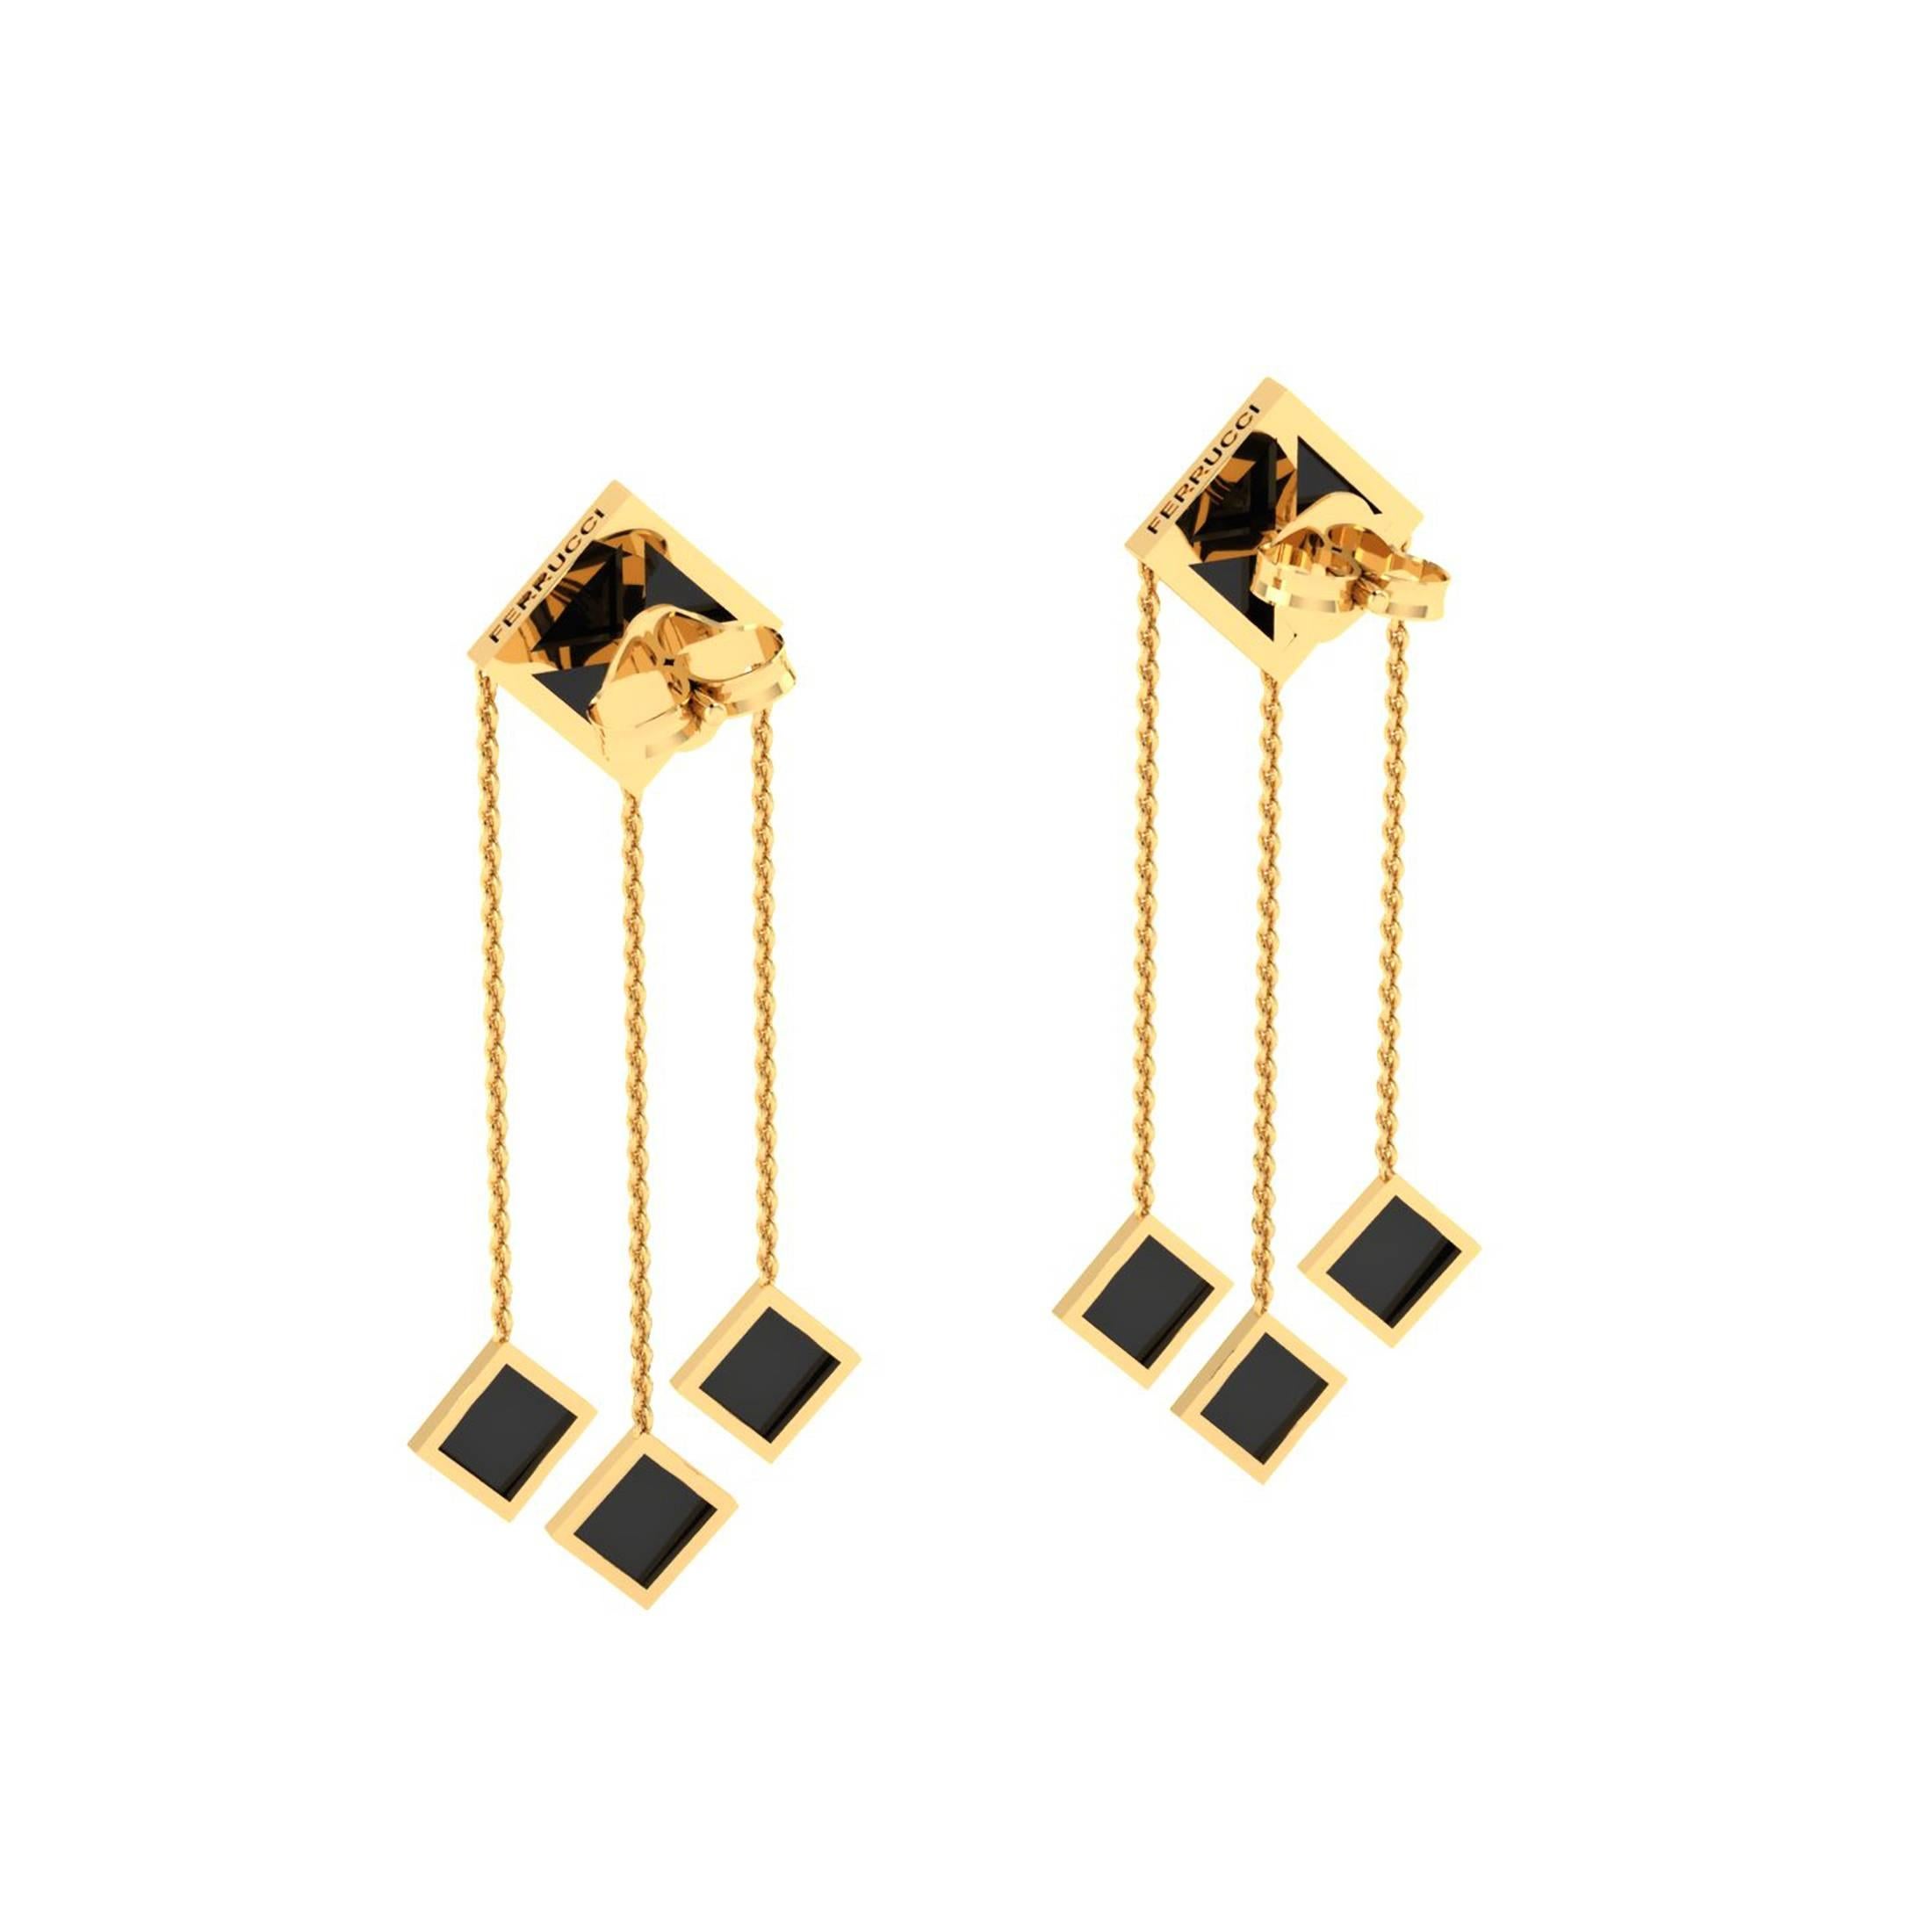 Ferrucci Black Onyx Pyramid Dangling 18 Karat Yellow Gold Earrings In New Condition For Sale In New York, NY